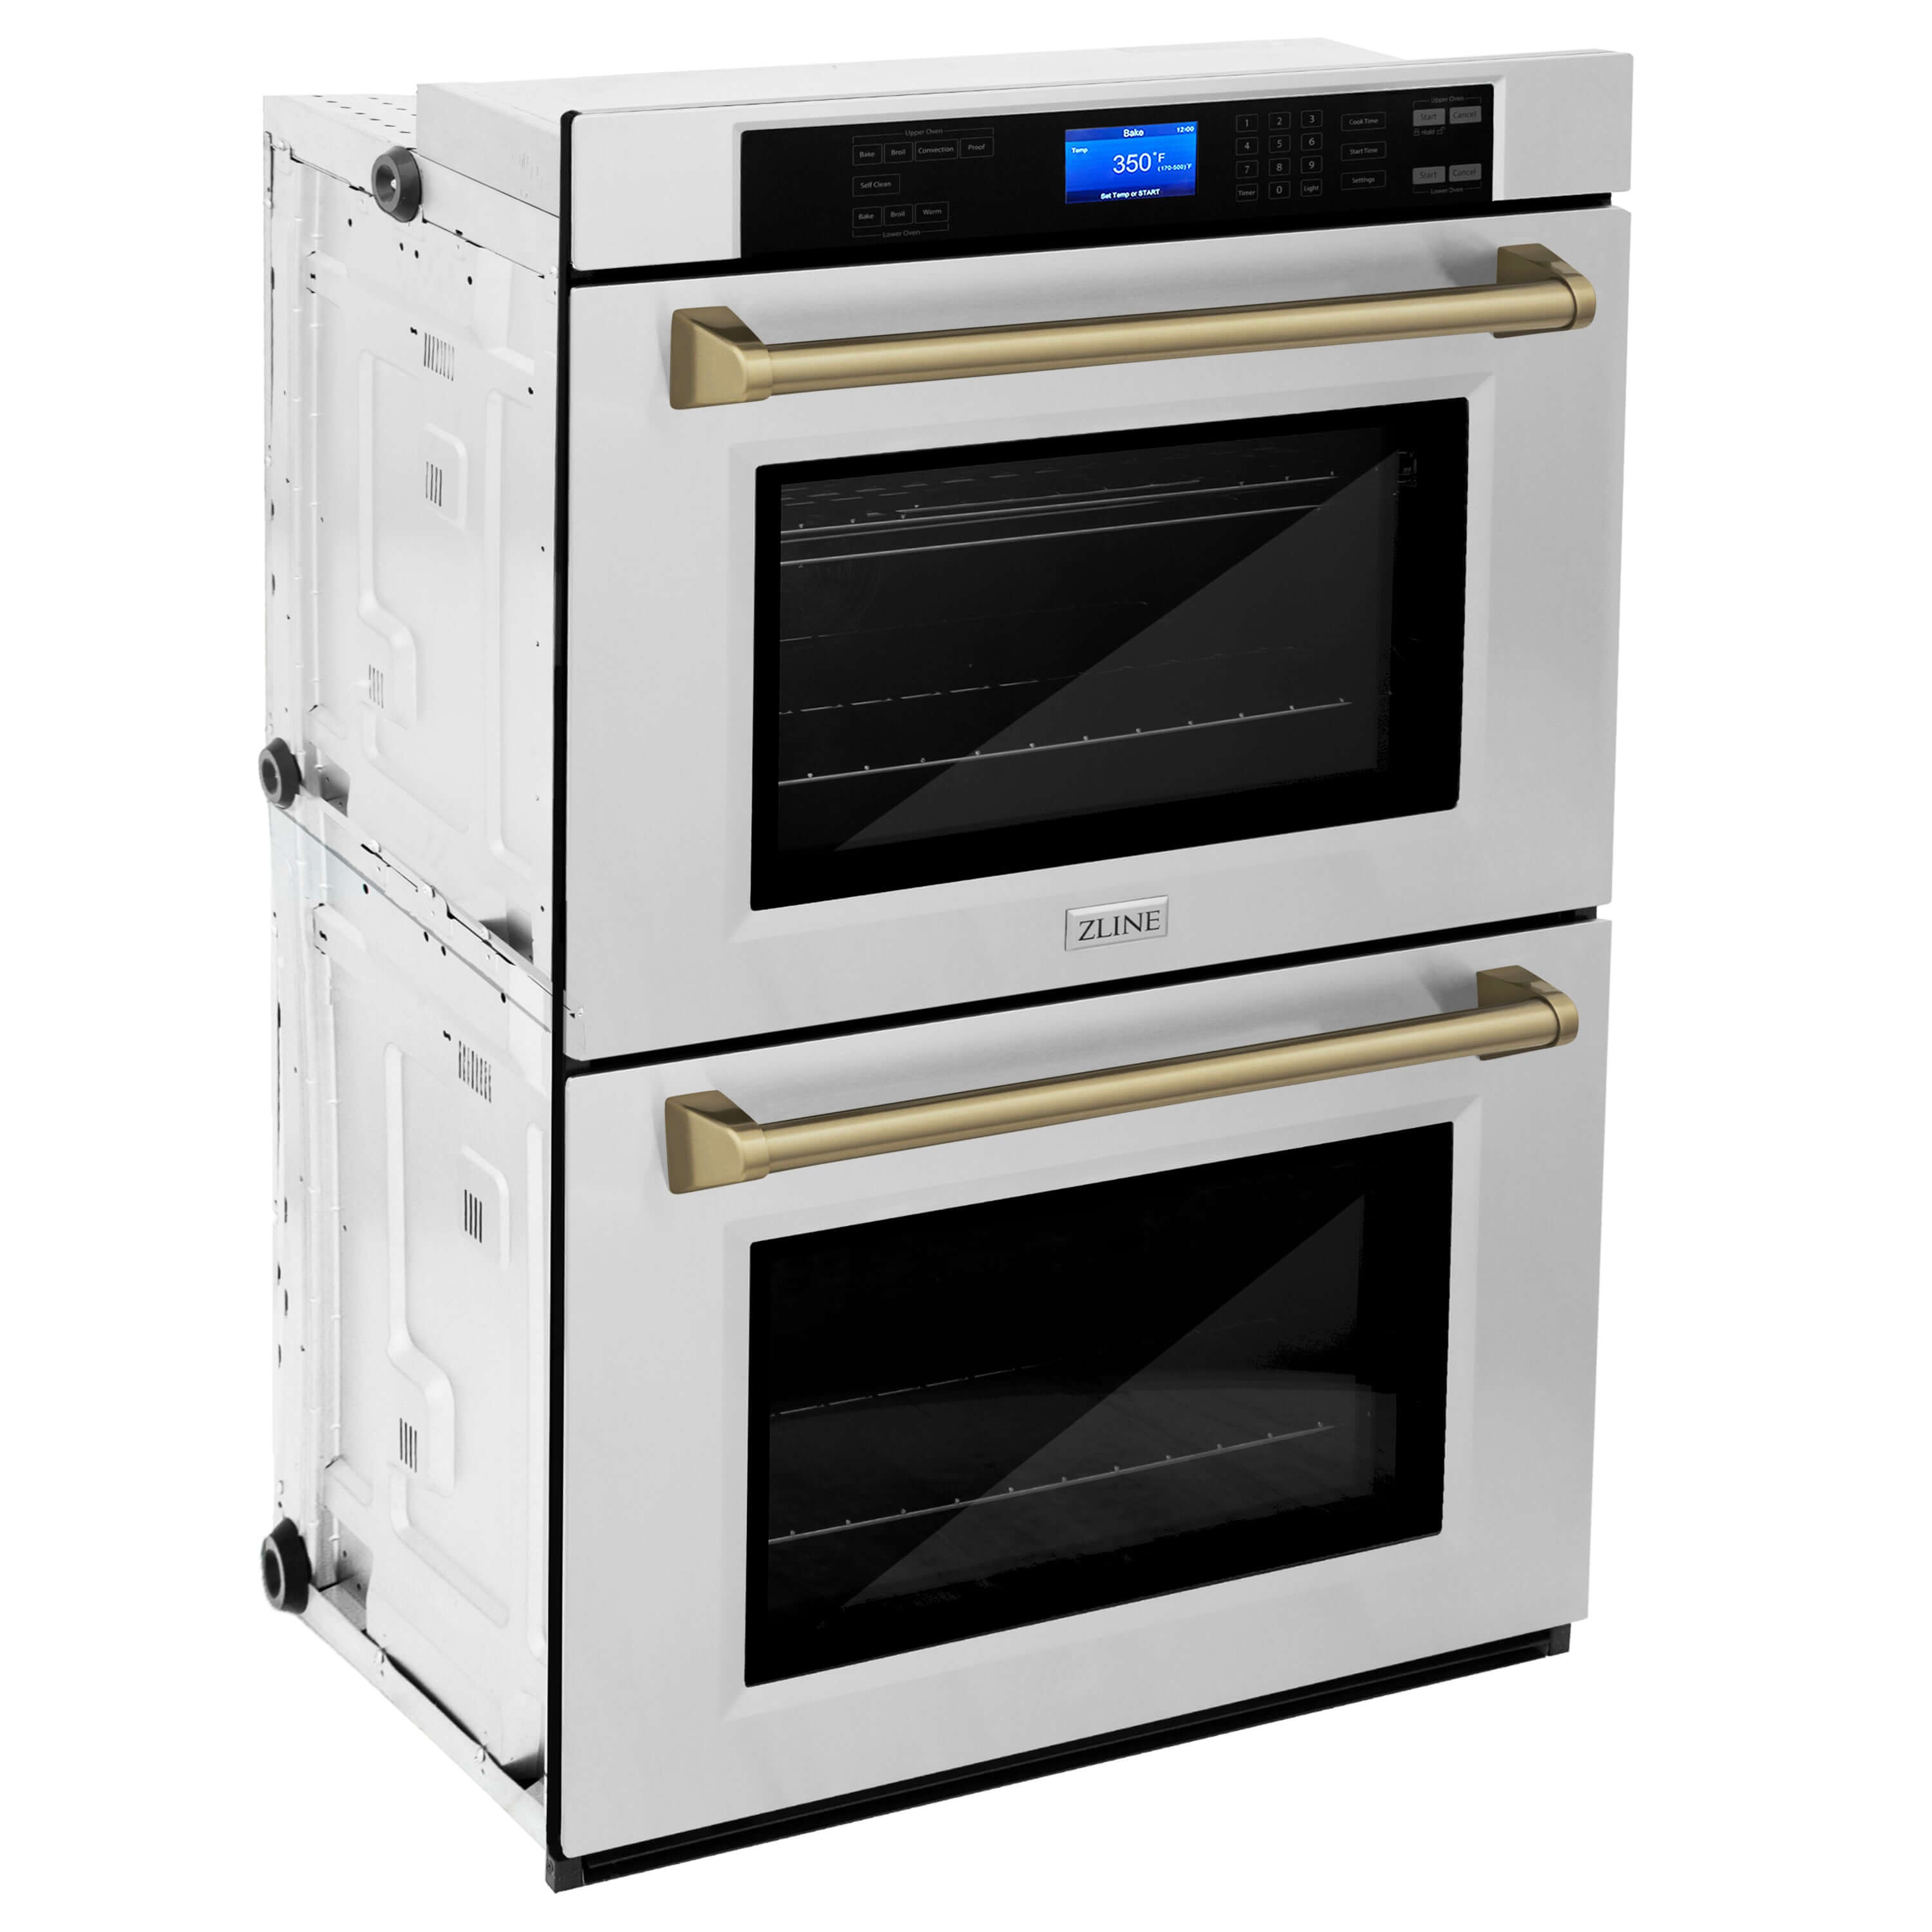 ZLINE Autograph Edition 30 in. Electric Double Wall Oven with Self Clean and True Convection in Stainless Steel and Champagne Bronze Accents (AWDZ-30-CB) side, oven closed.